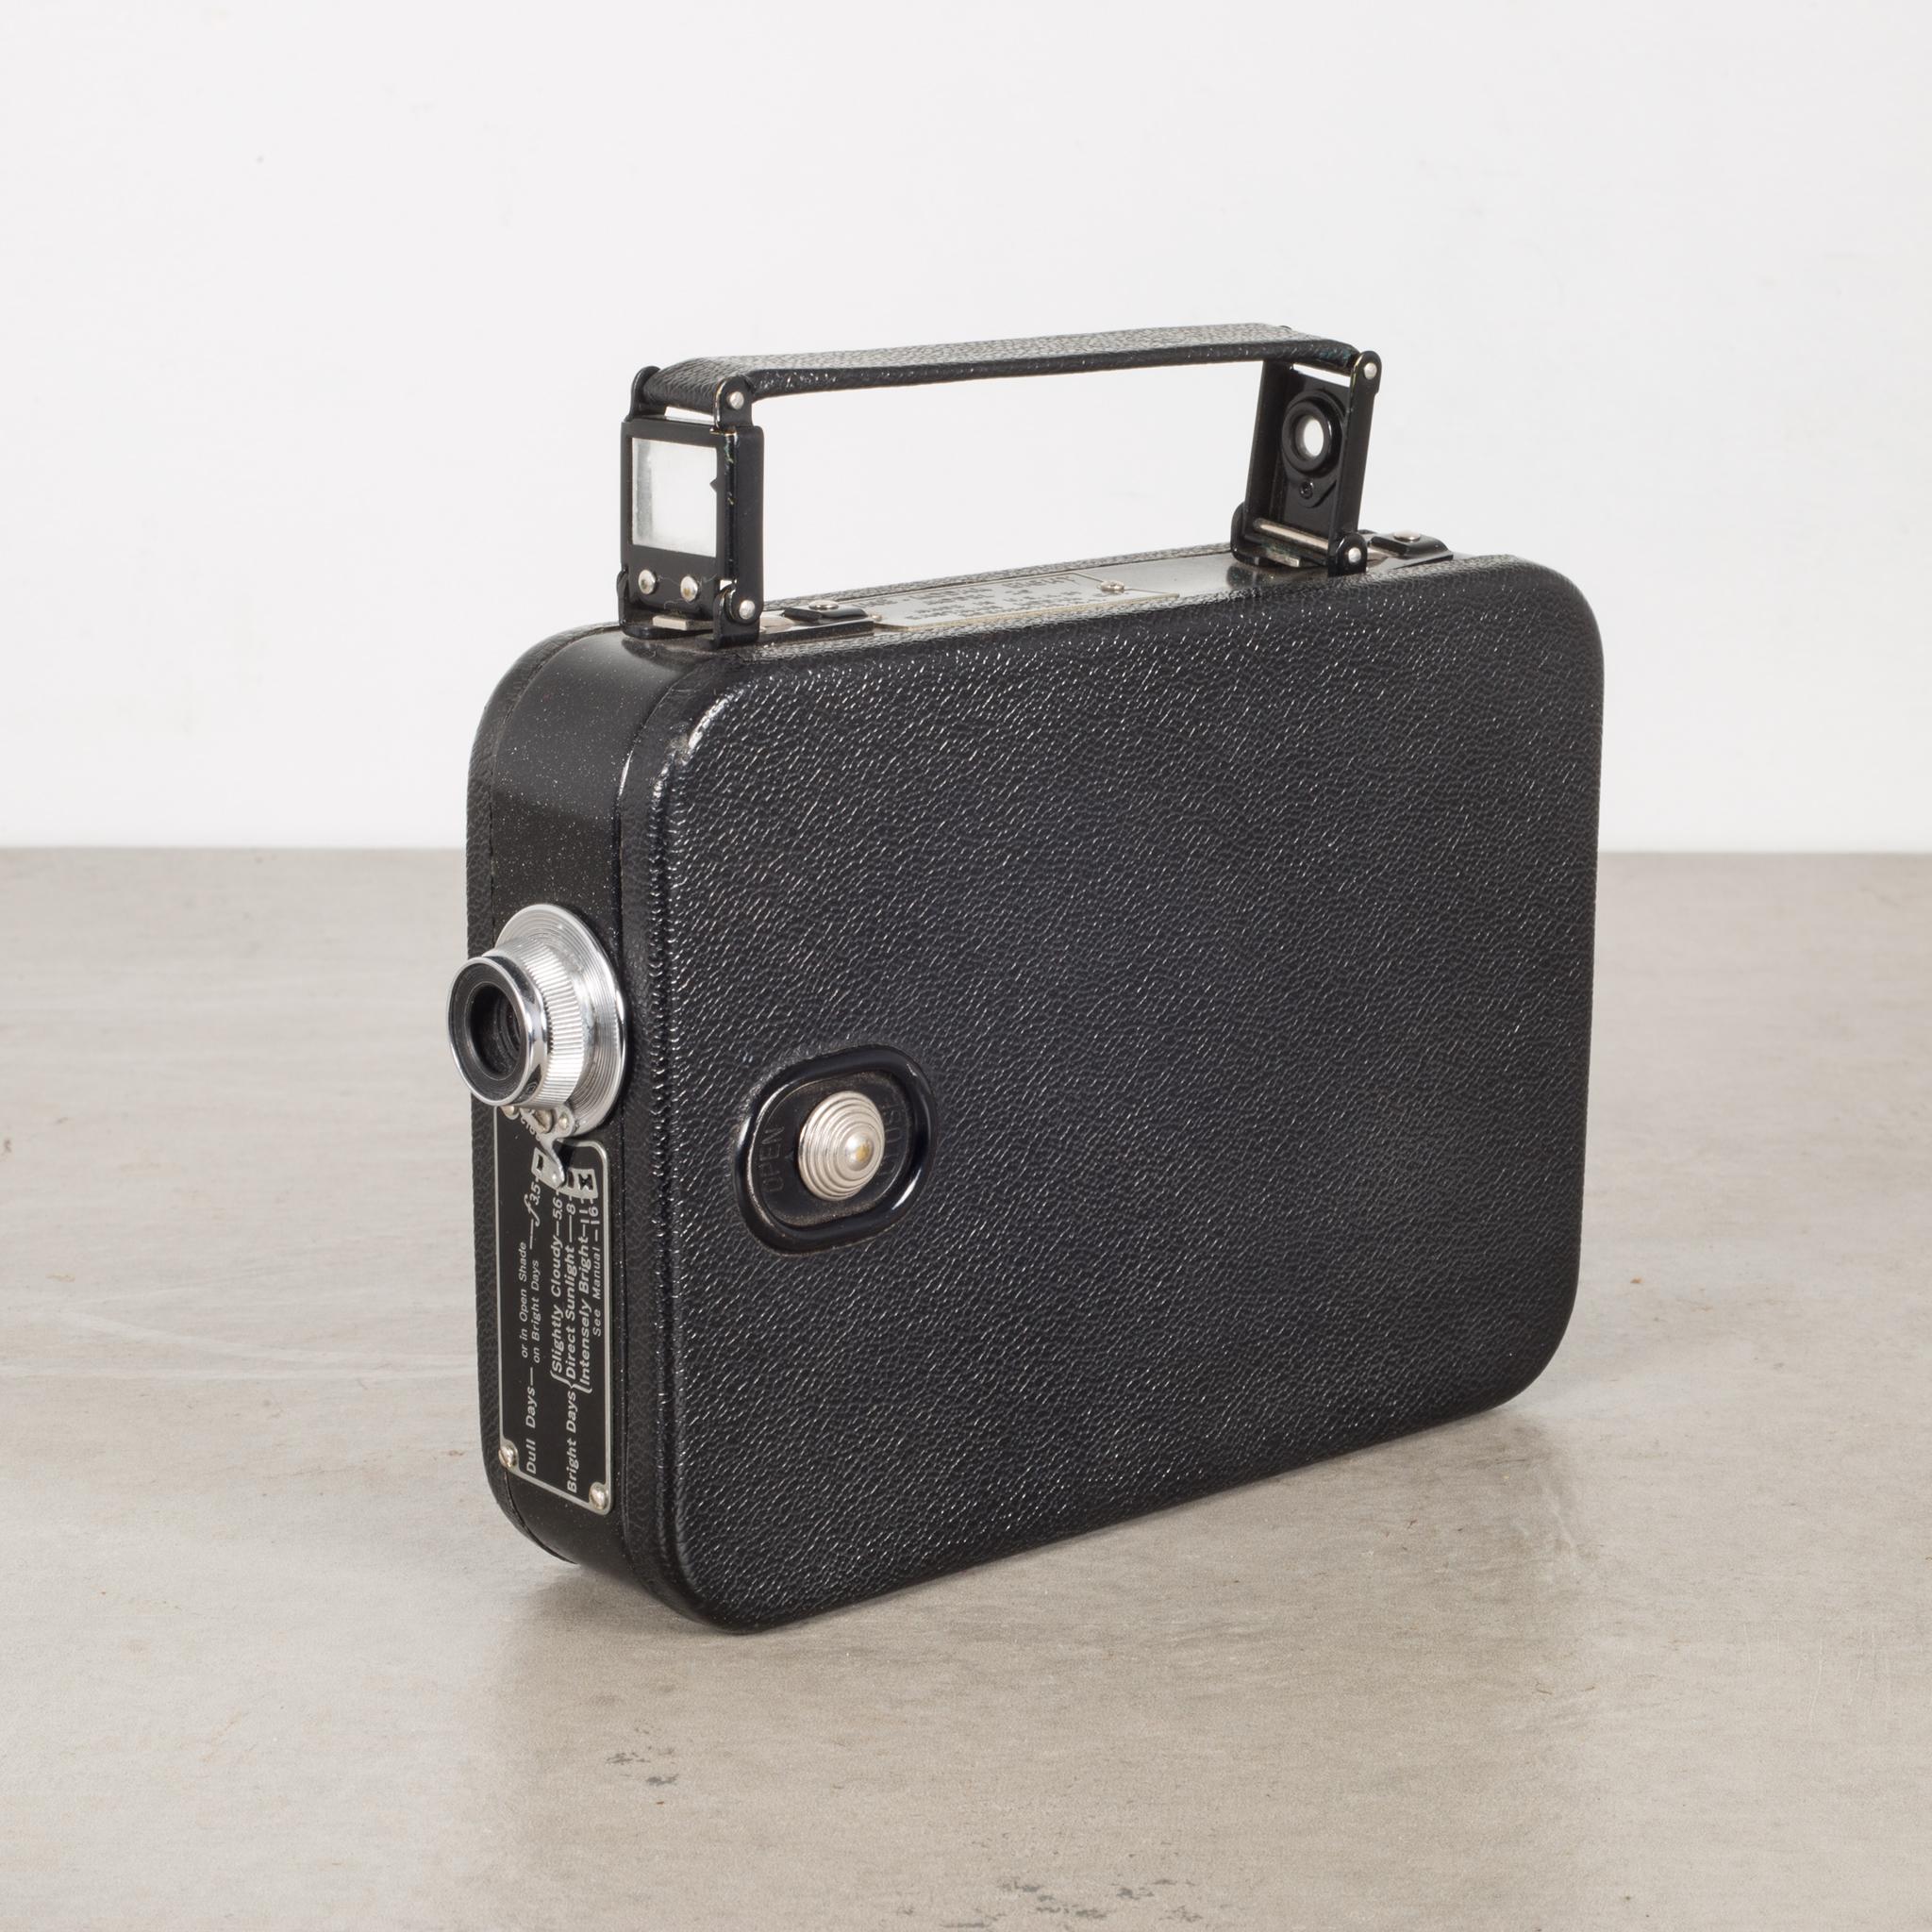 About:

This is a leather wrapped Cine-Kodak 8mm movie camera with a pop up viewfinder, leather handle and brass winding handle. Original leather case with handle and closing latch. This camera has retained its original finish. The camera may or